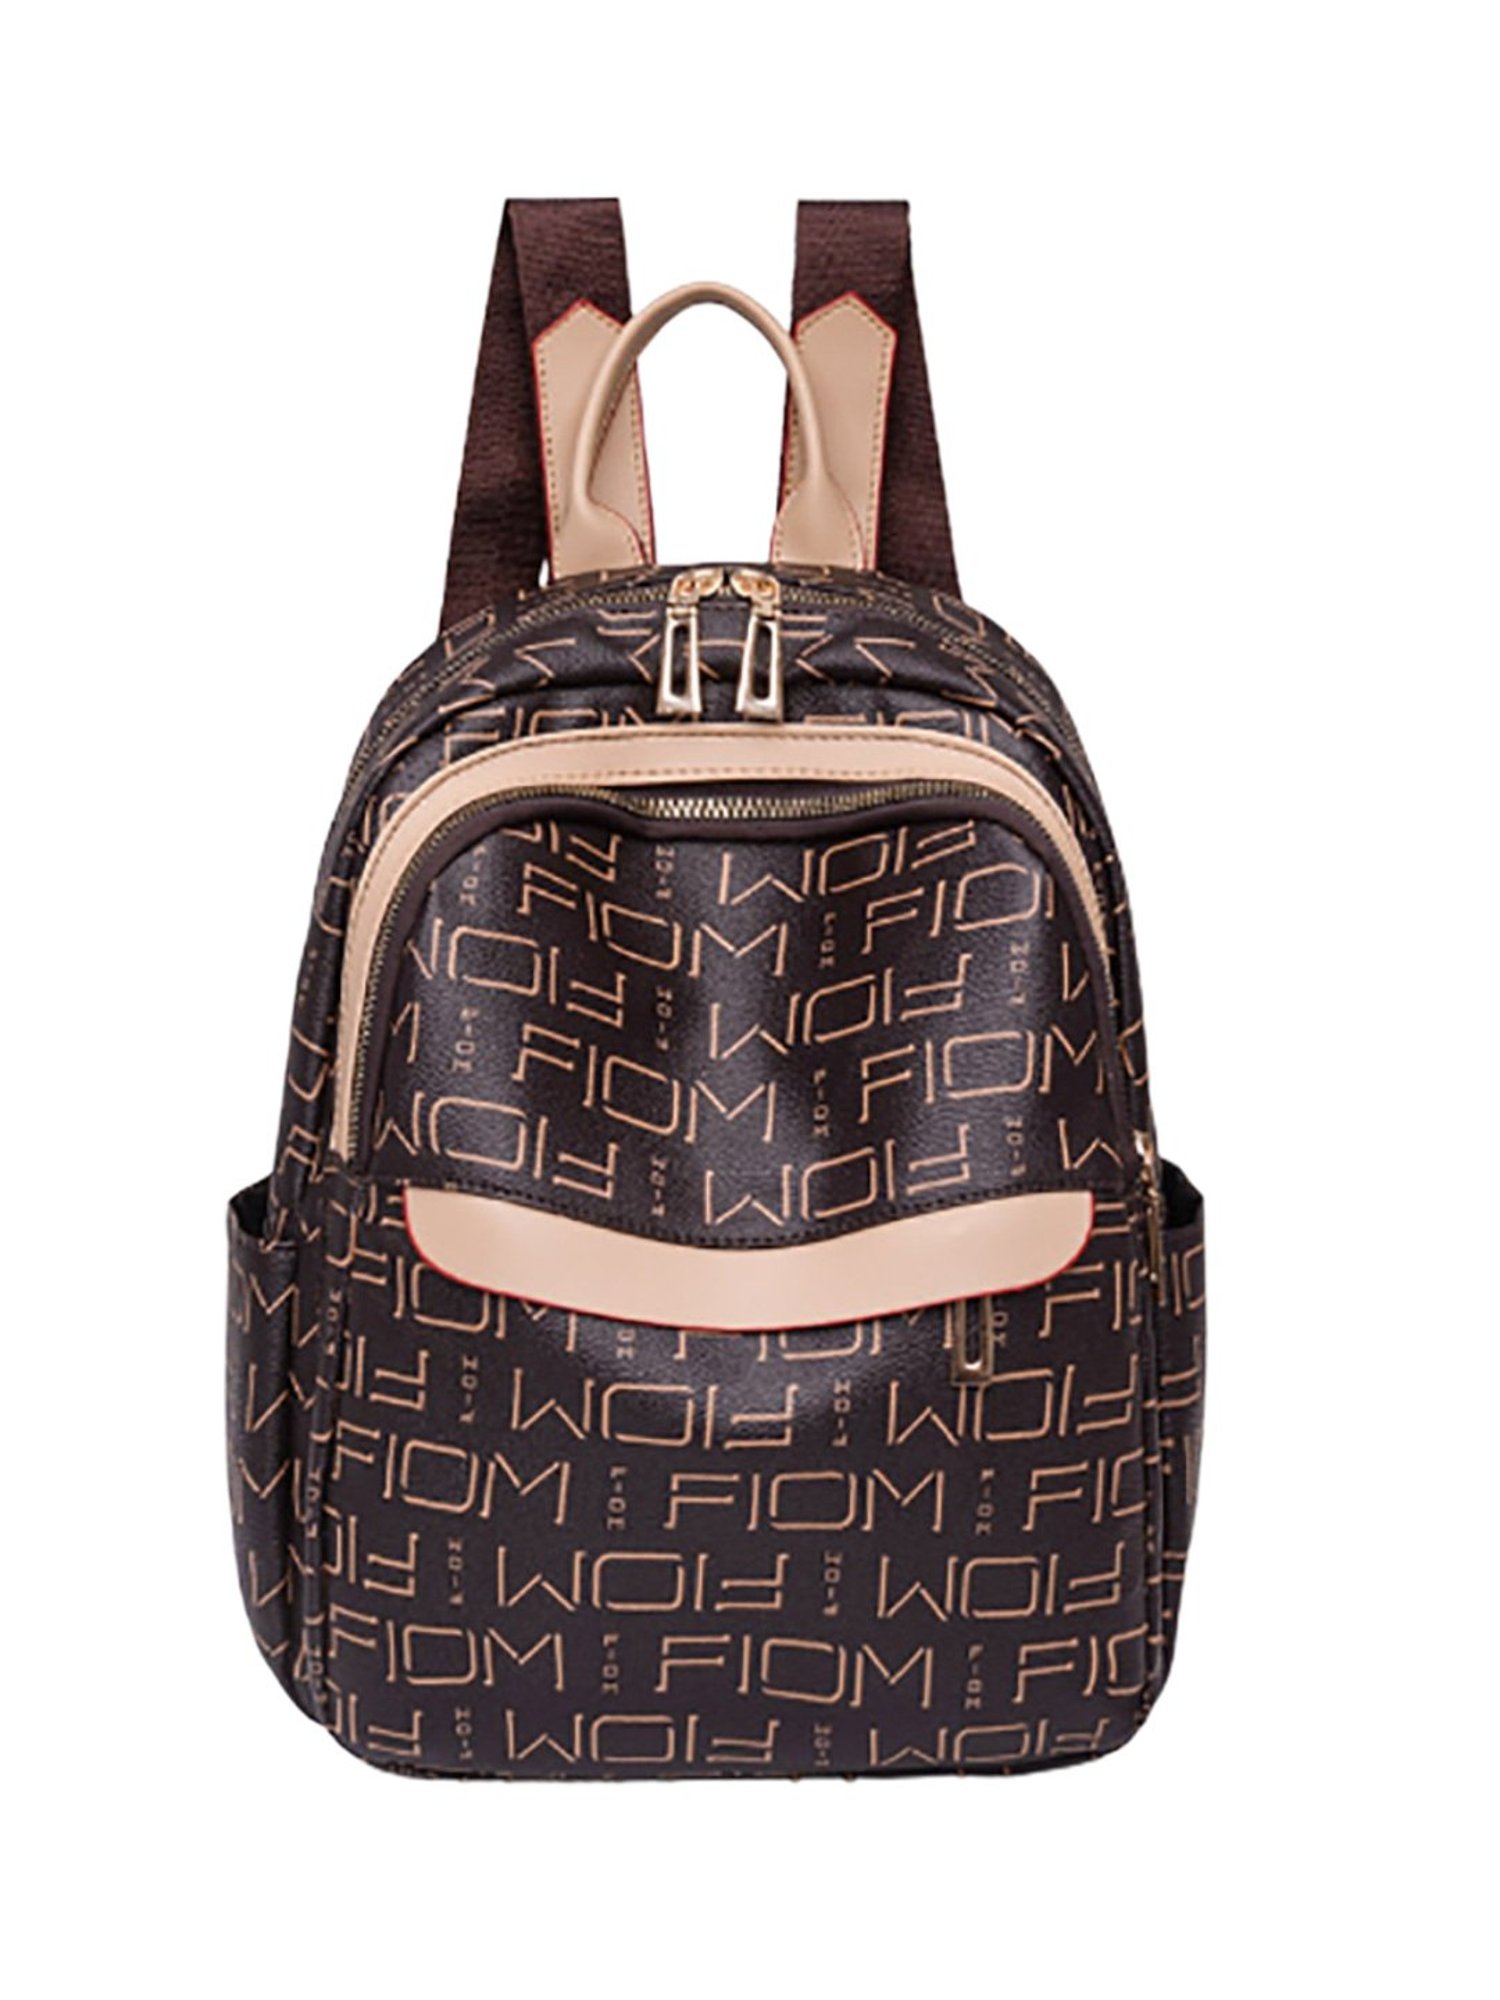 Buy Styli Brown Checked Pattern Shoulder Bag at Best Price @ Tata CLiQ